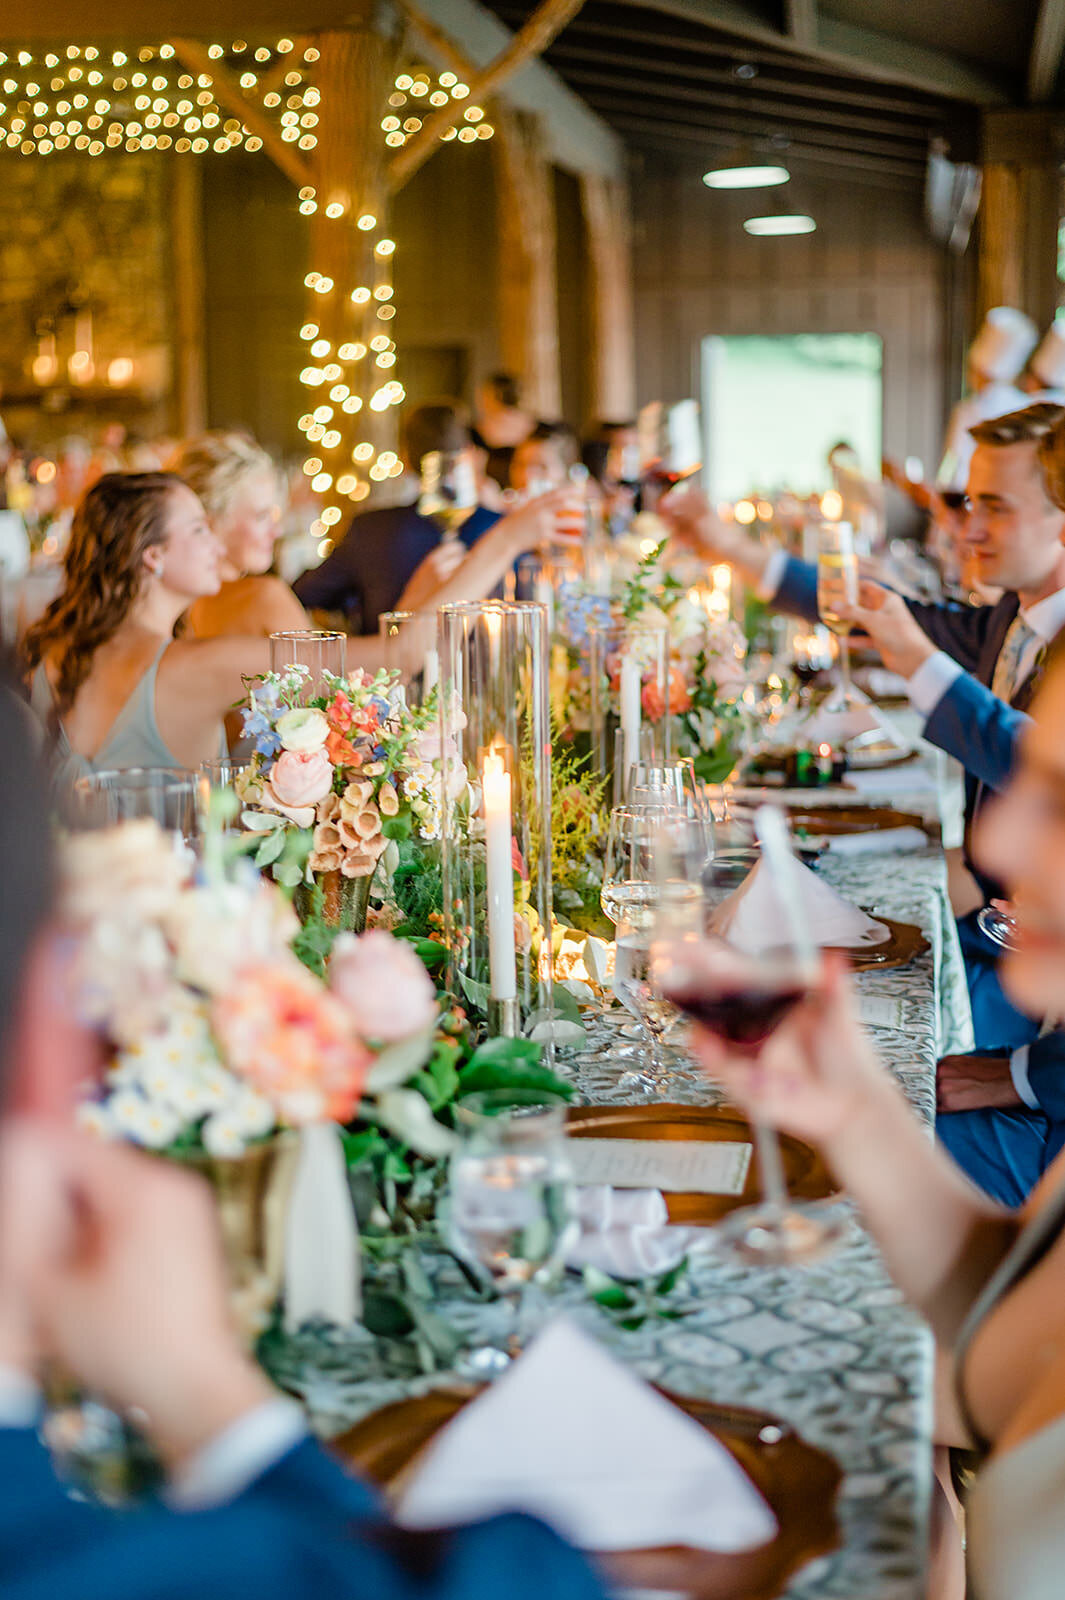 Wedding guests clink glasses during toasts